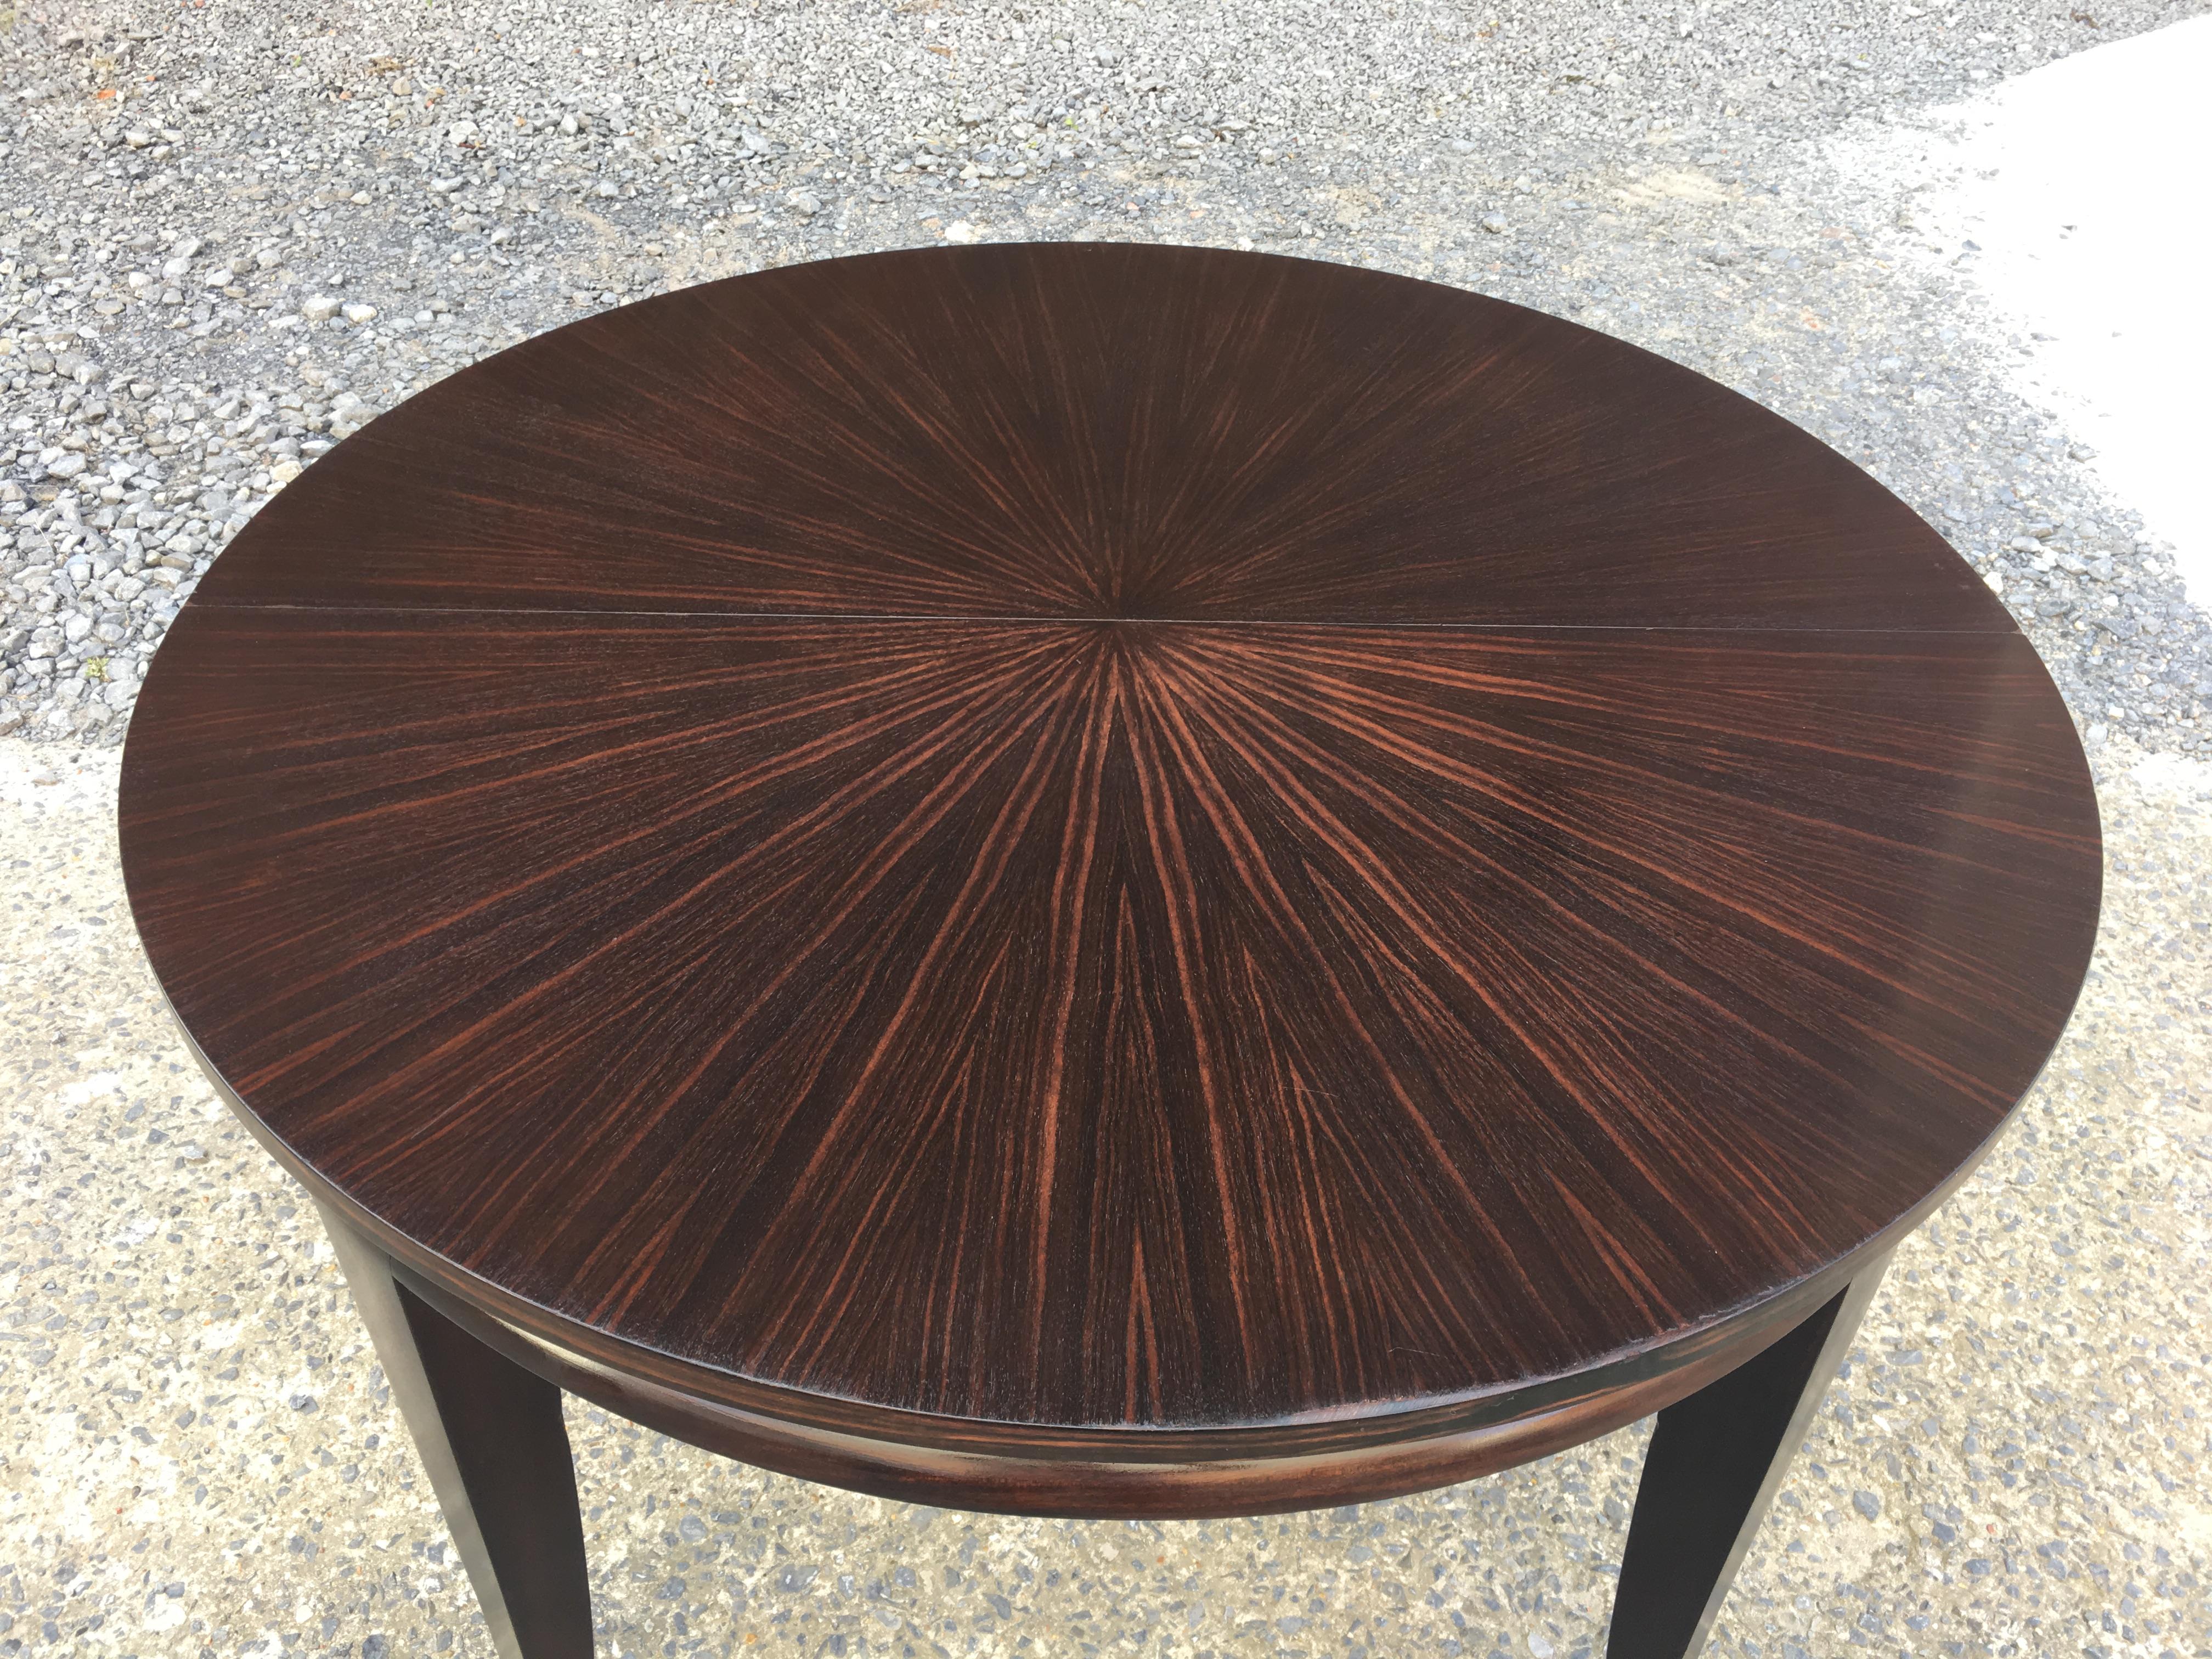 Maxime Old (attributed to), Art Deco table in Macassar ebony veneer, circa 1940
possibility of extensions (missing)
Up to 290 cm in length.